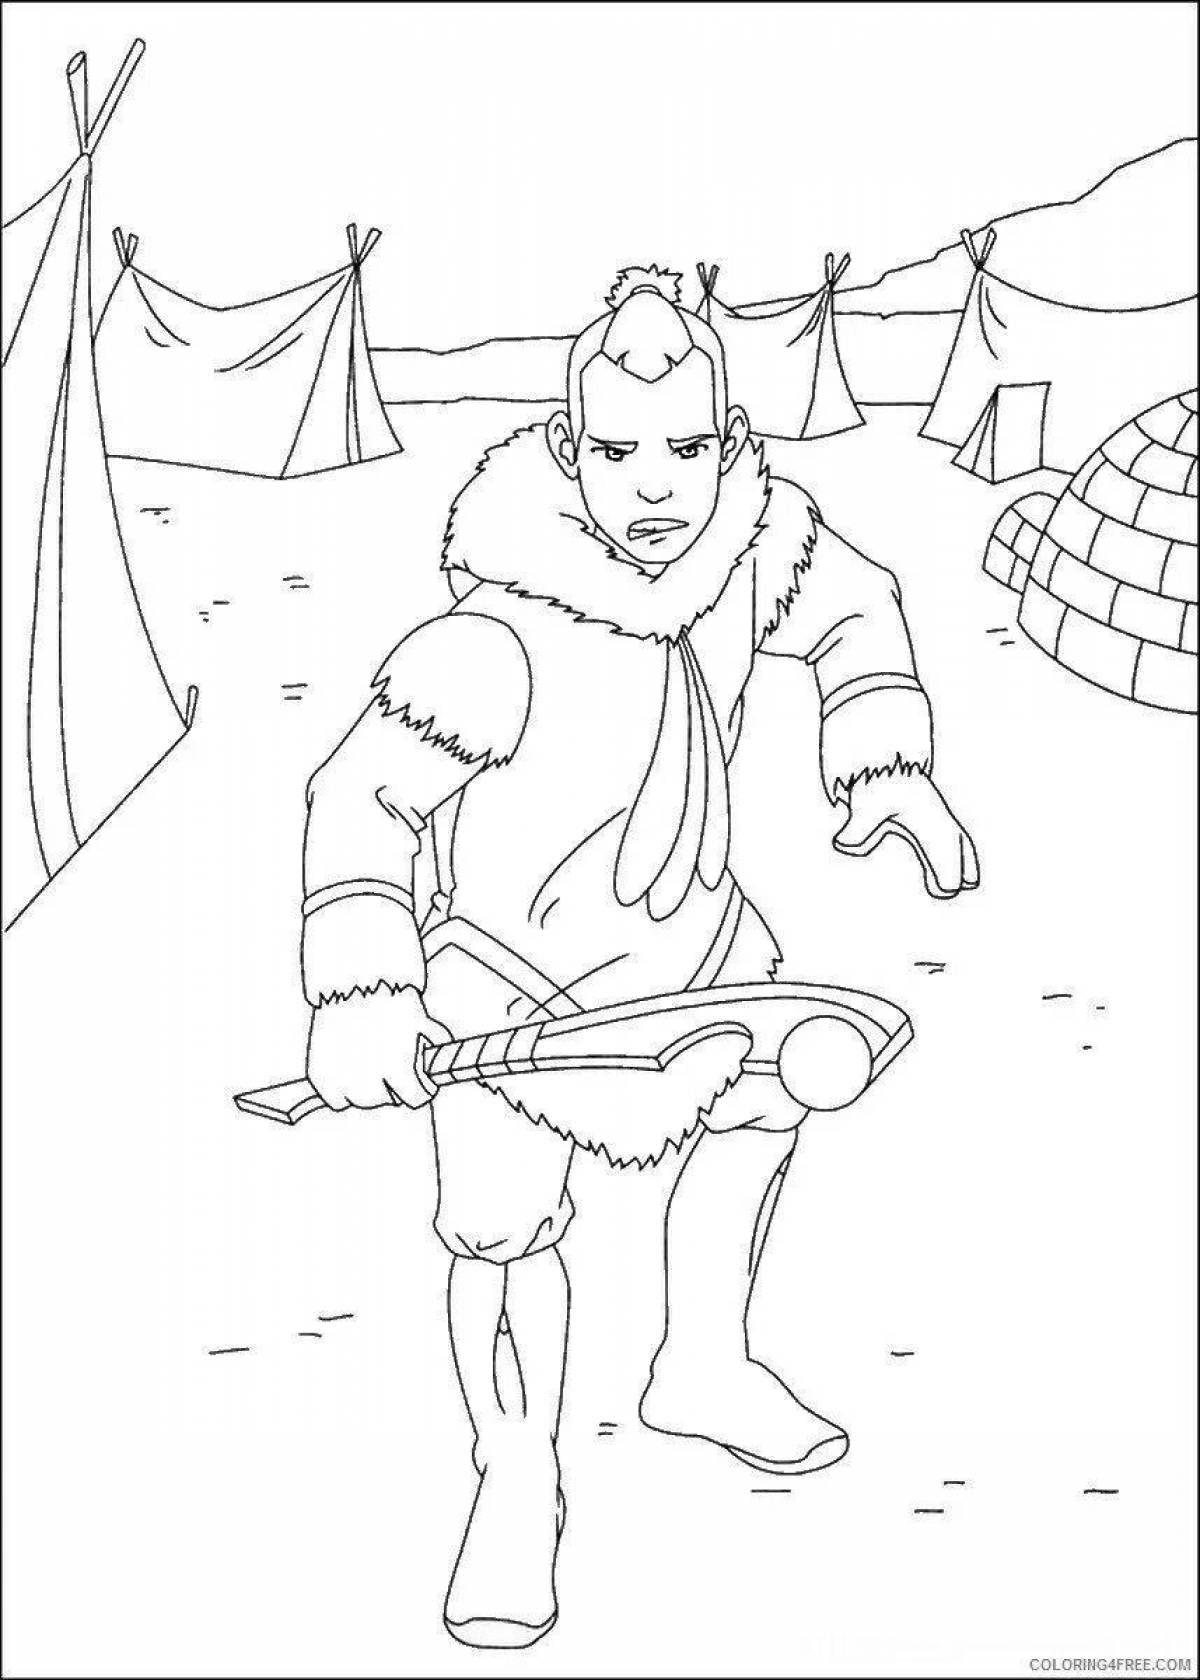 Color-fiesta avatar coloring page for kids